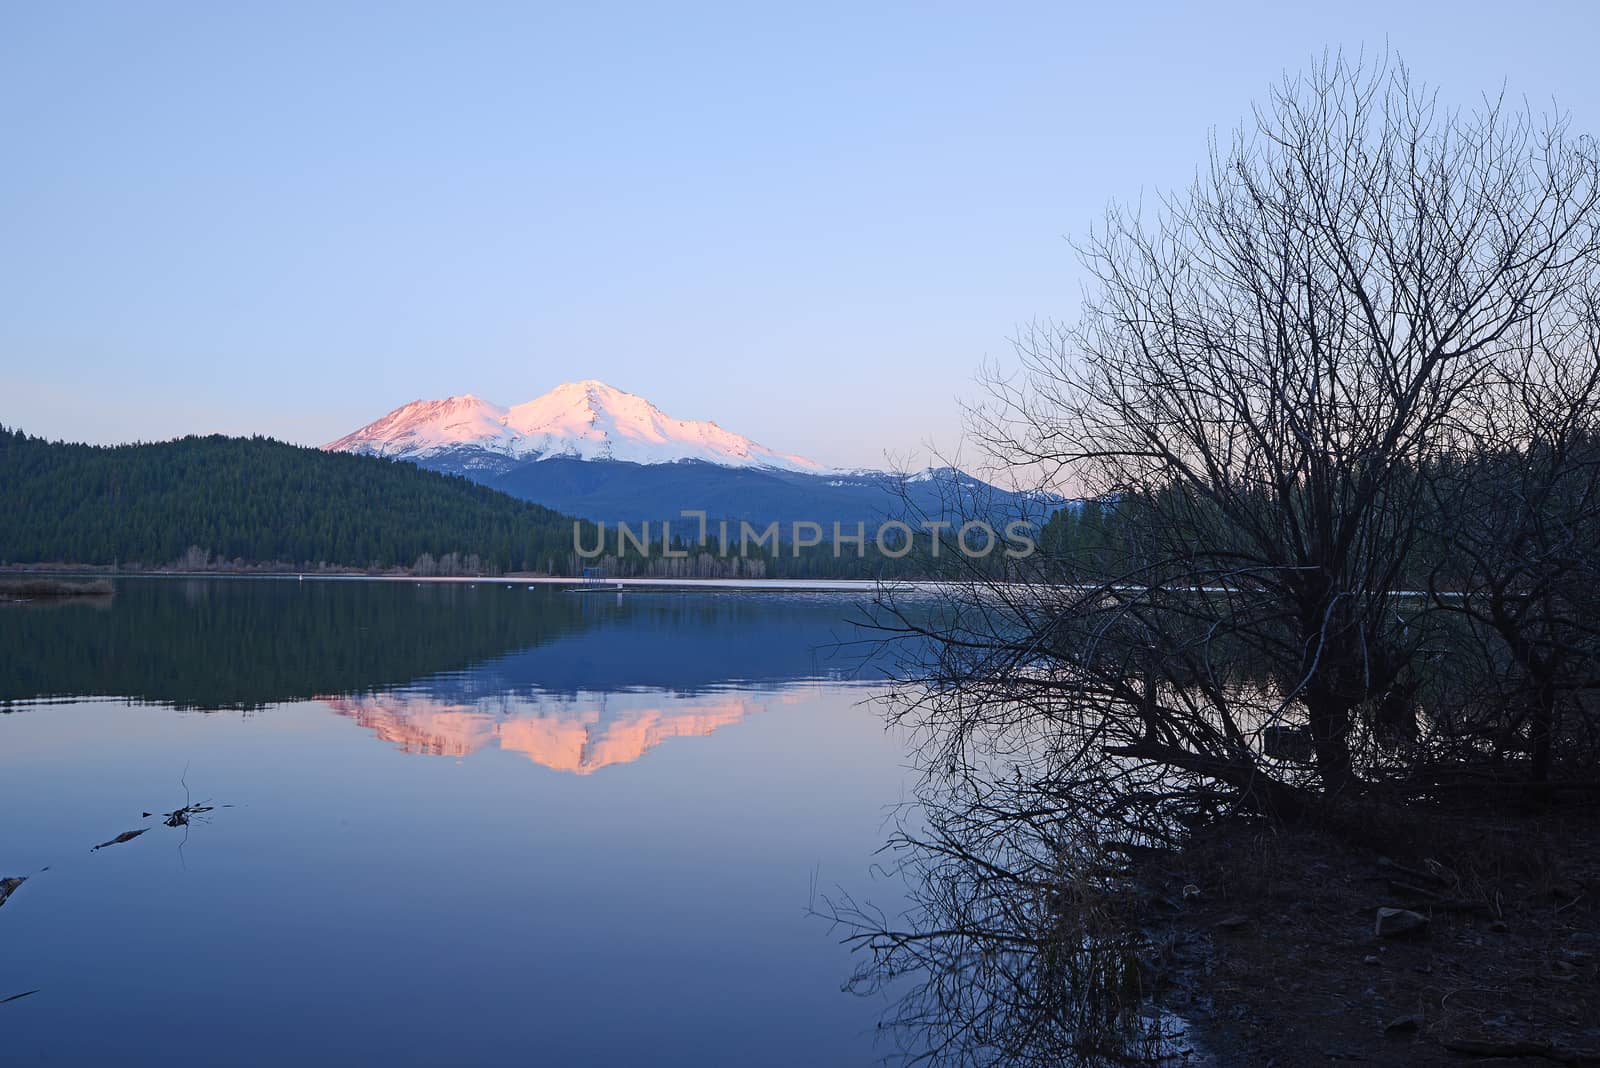 a reflection of mount shasta over a lake during sunset